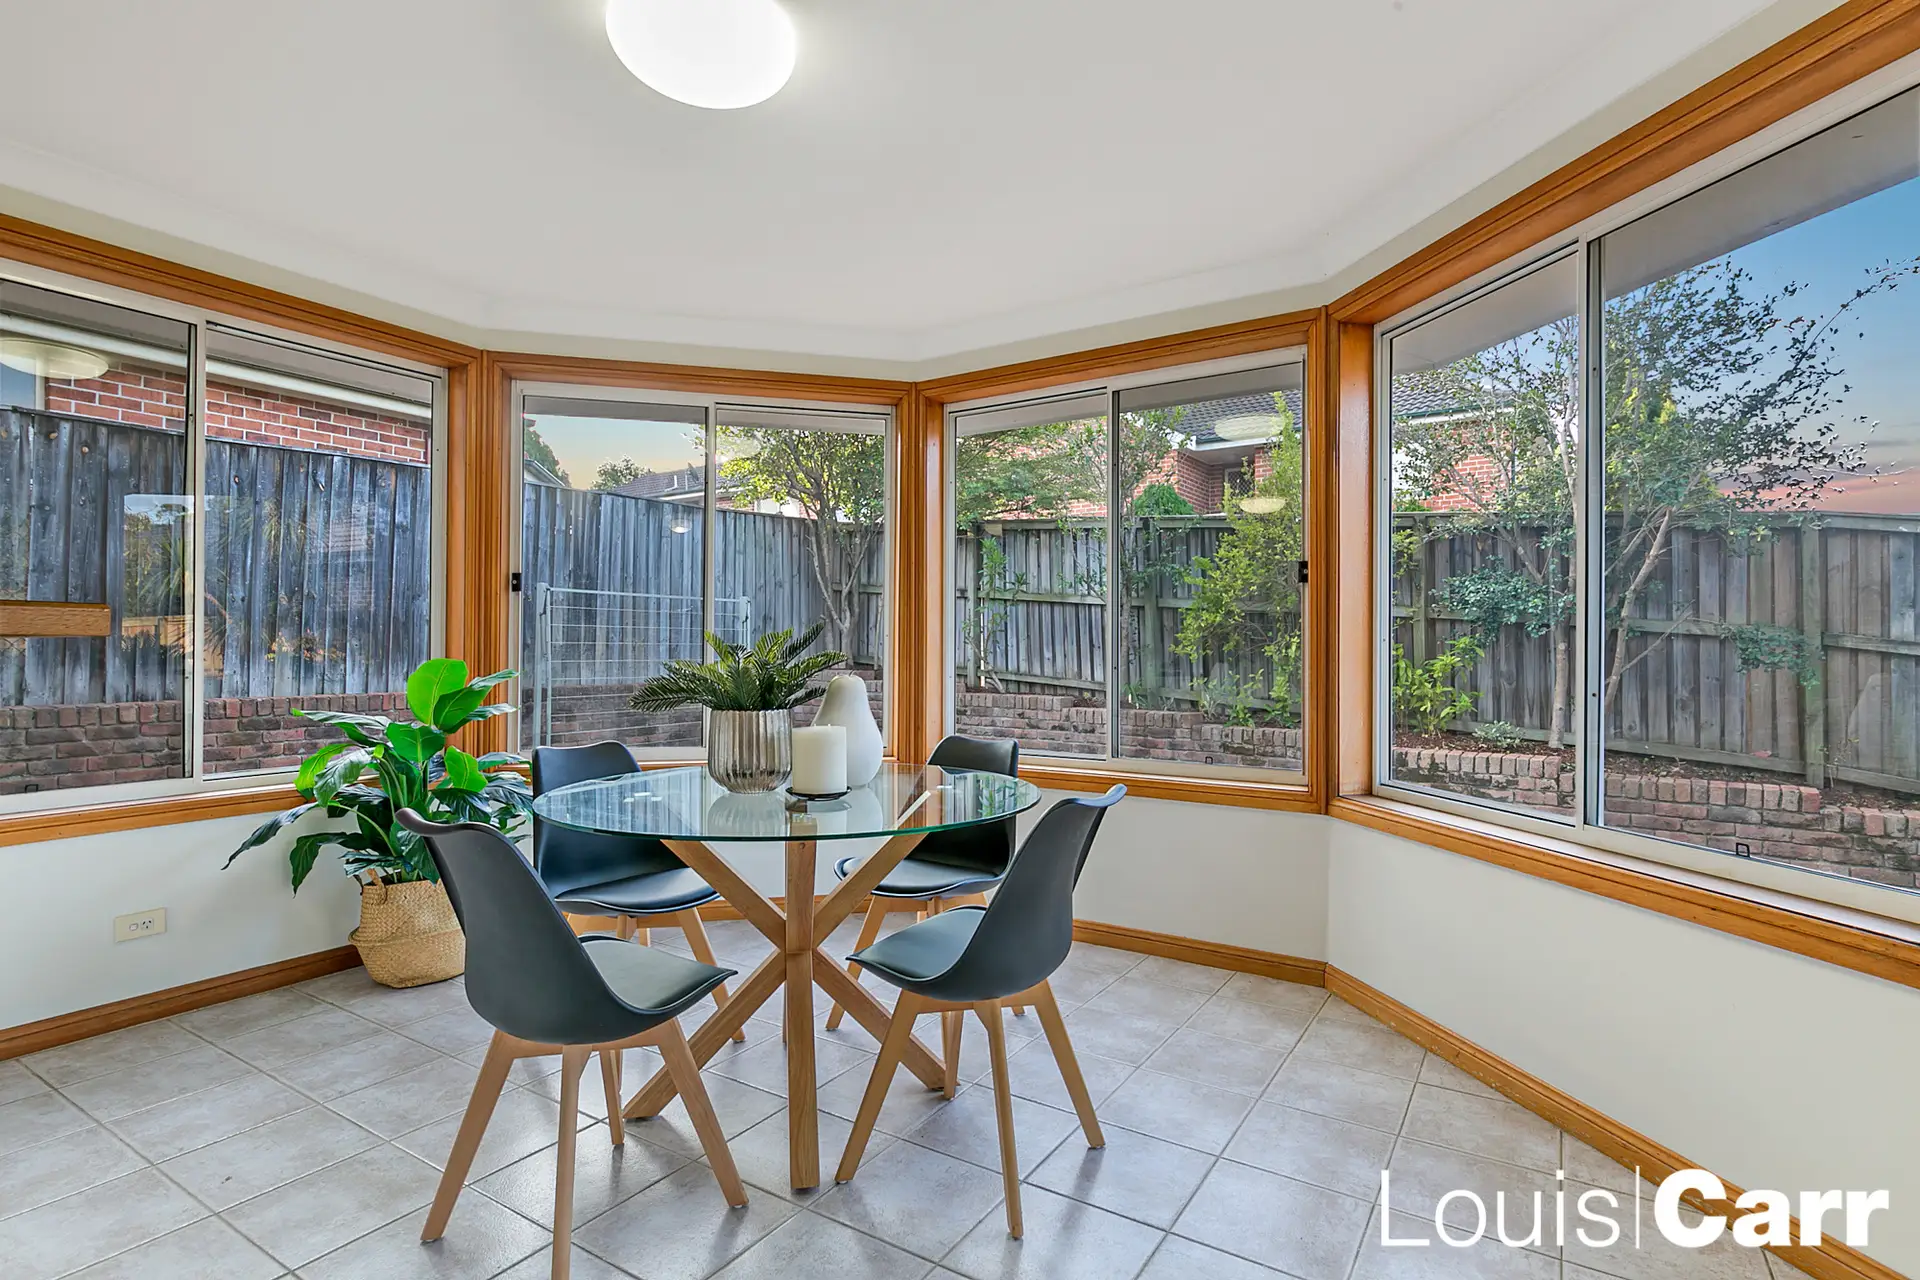 Photo #5: 3 Belinda Court, Castle Hill - Sold by Louis Carr Real Estate